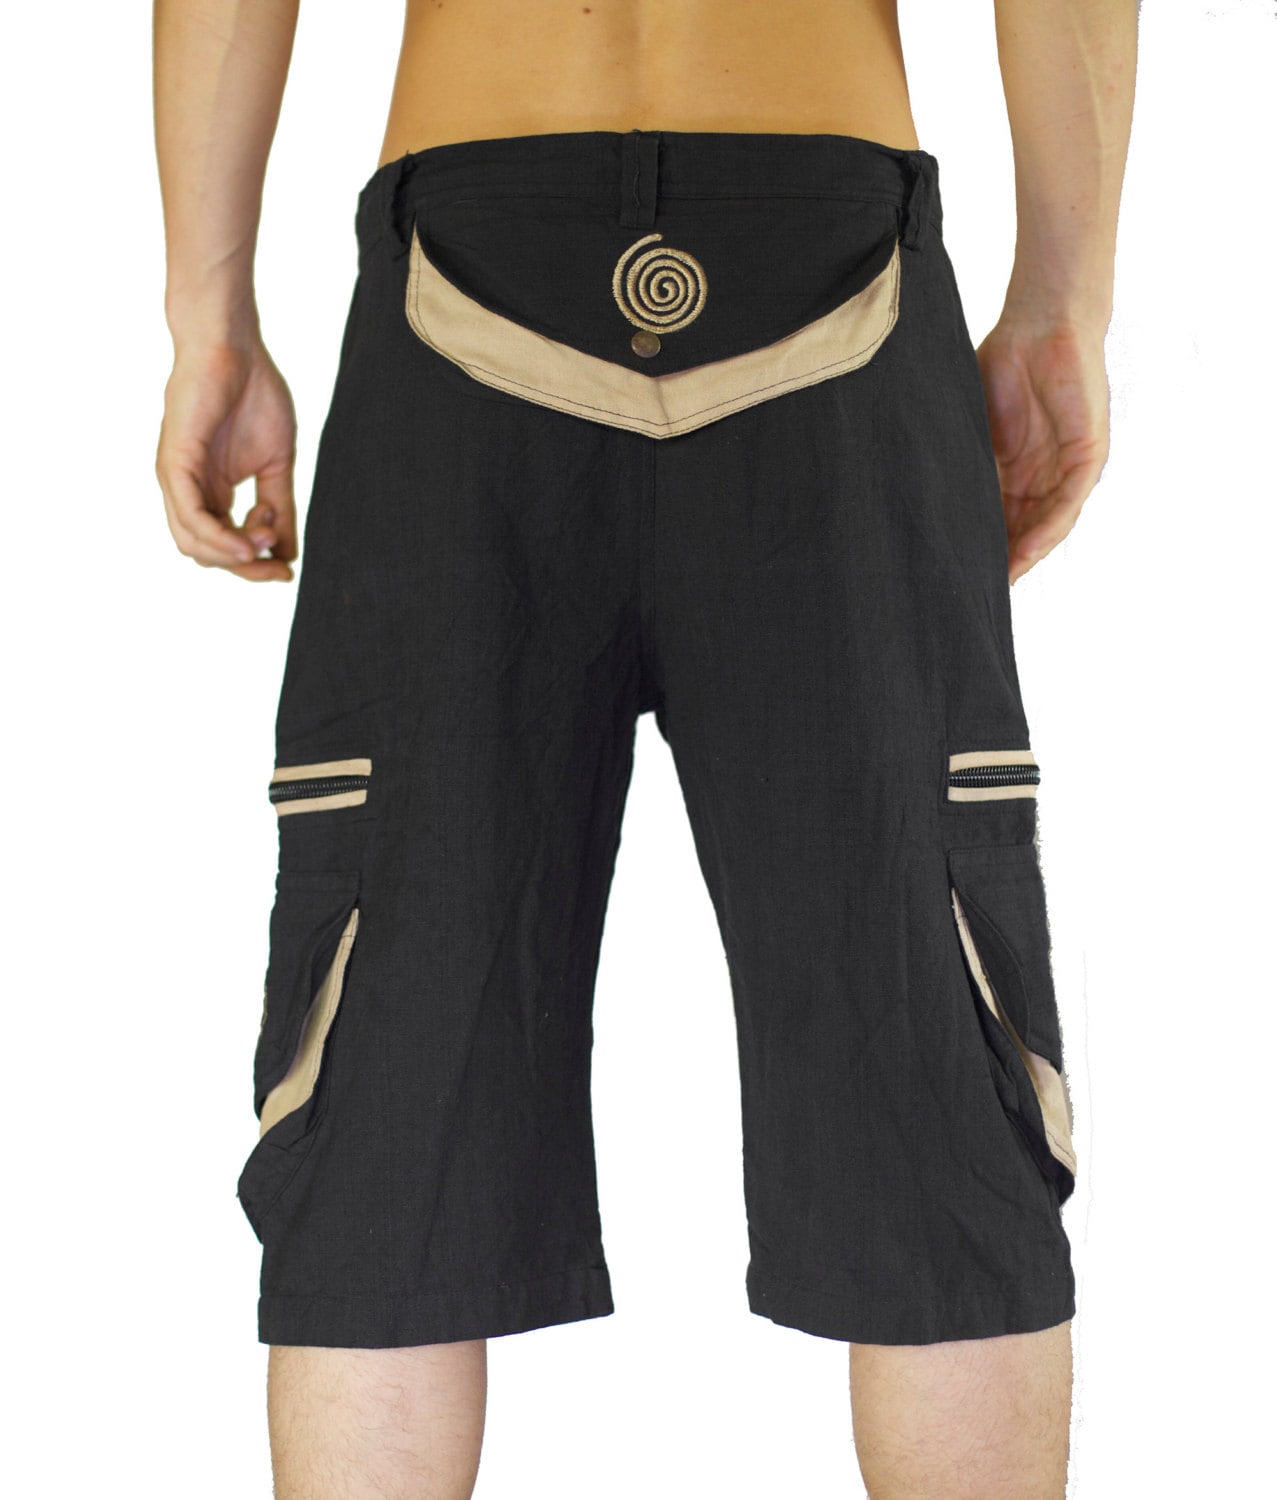 Goa Pant clamdiggers many pockets with flower of life embroidery fully customizable made after order